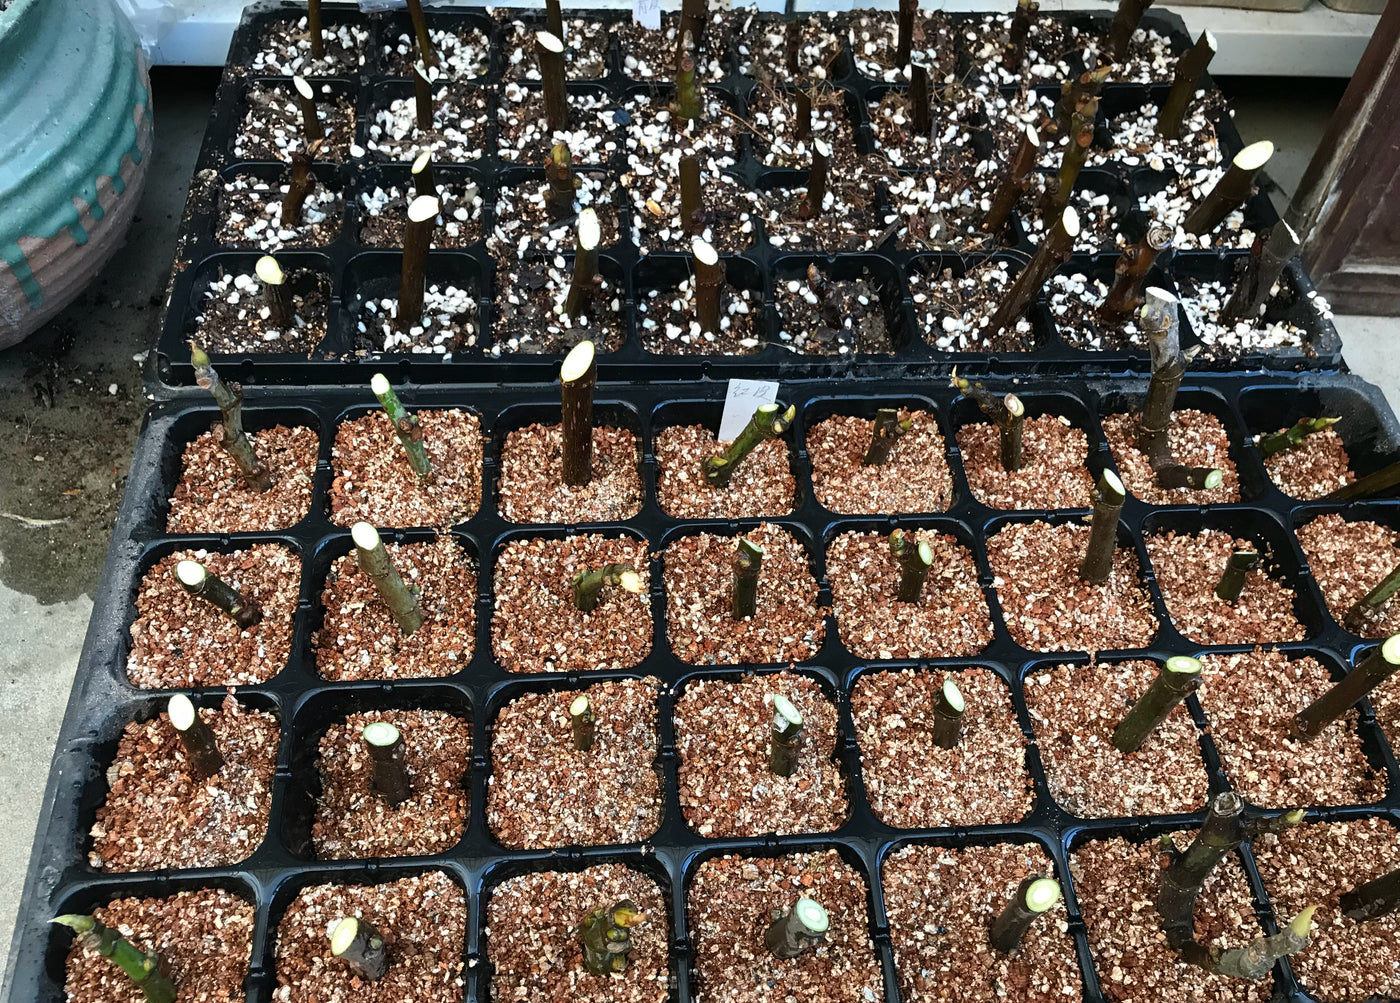 Propagating Plants from Cuttings